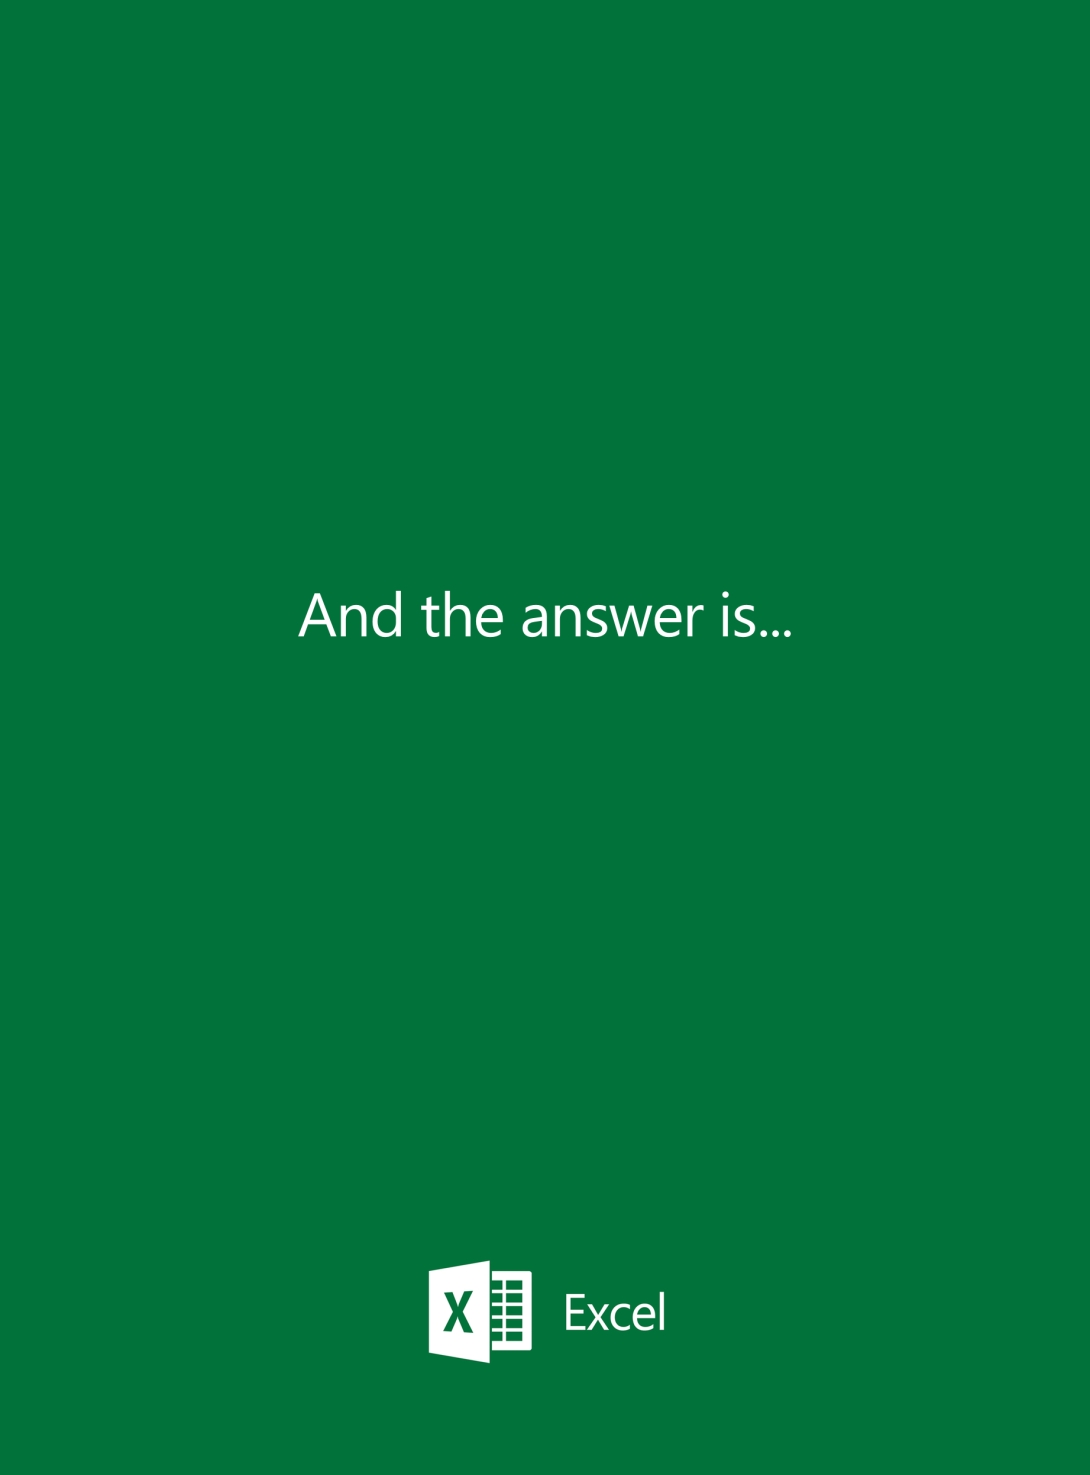 advertising concept for spreadsheets - and the answer is MS Excel